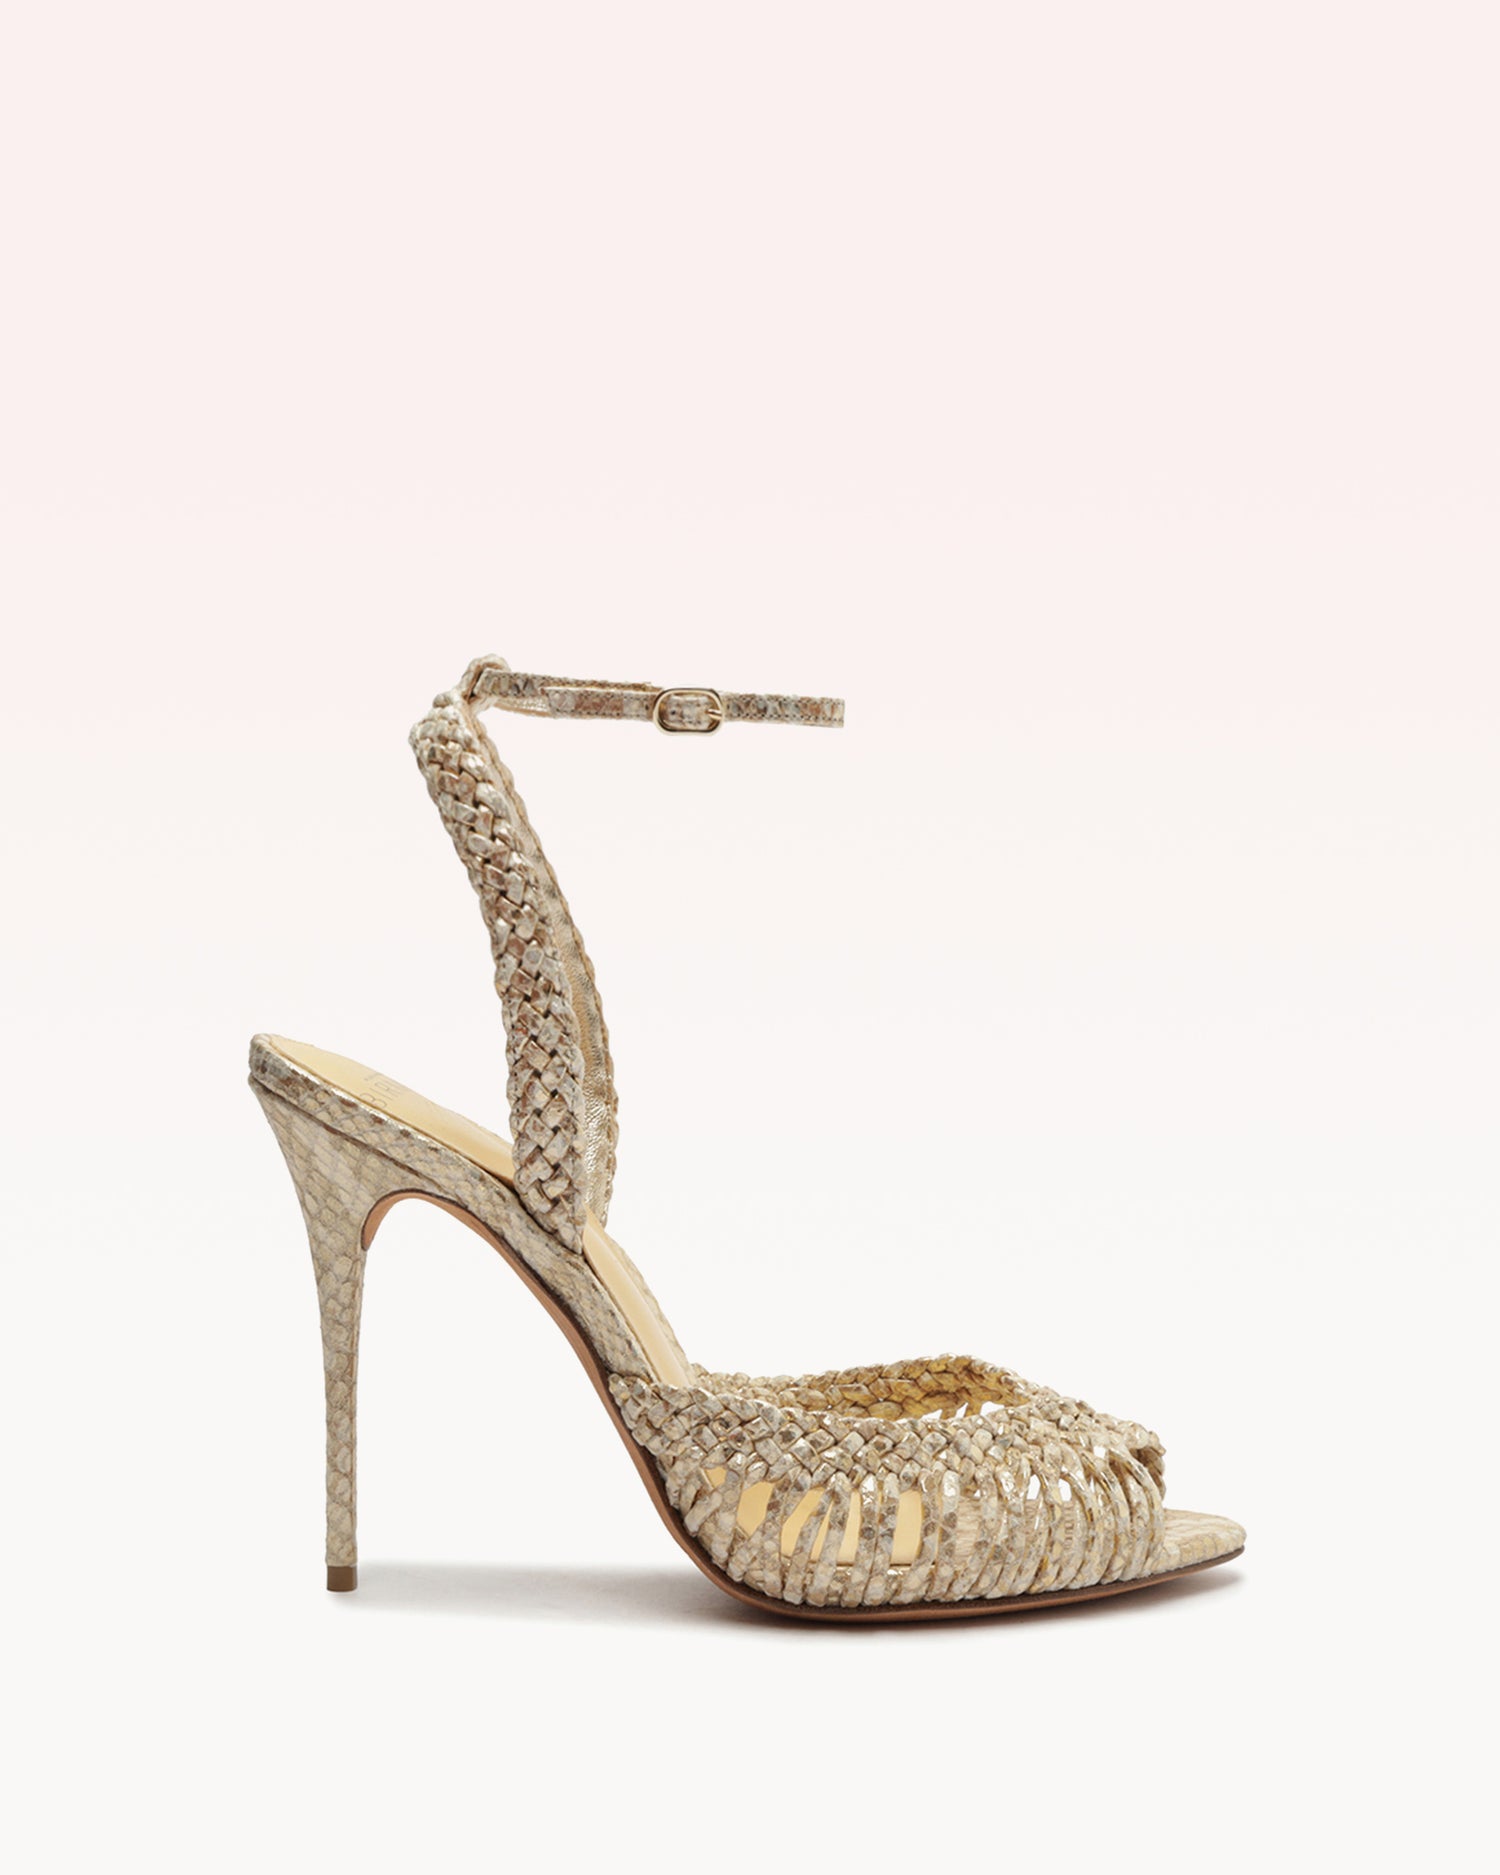 Agatha 100 Gold Sandals S/23 35 Gold Python Embossed